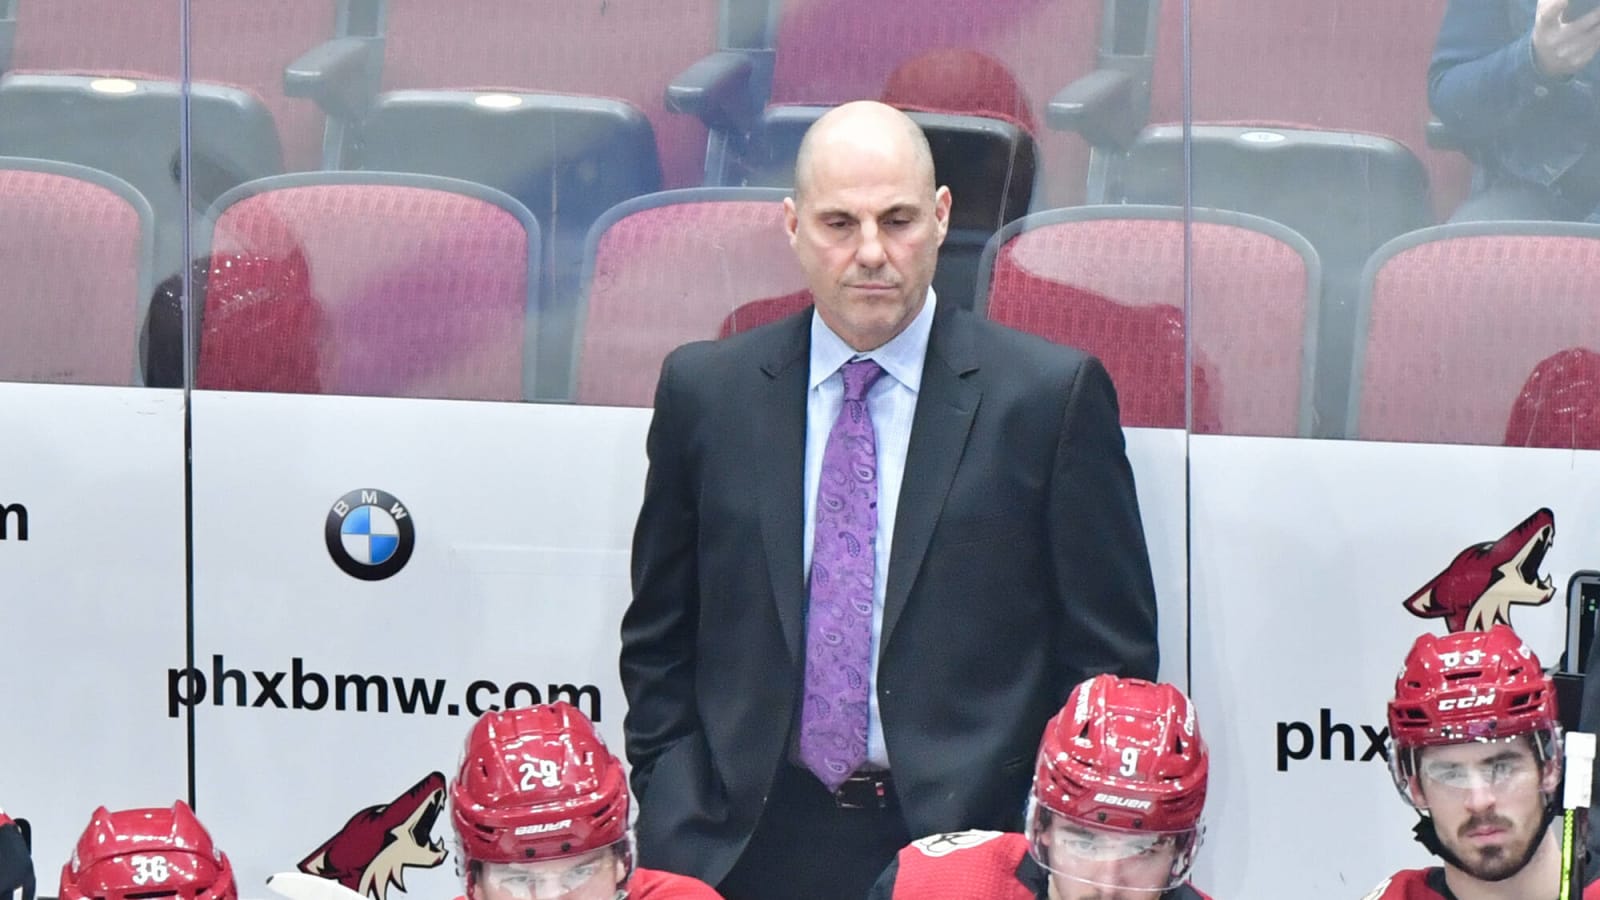 The Canucks have actually been good defensively under Rick Tocchet